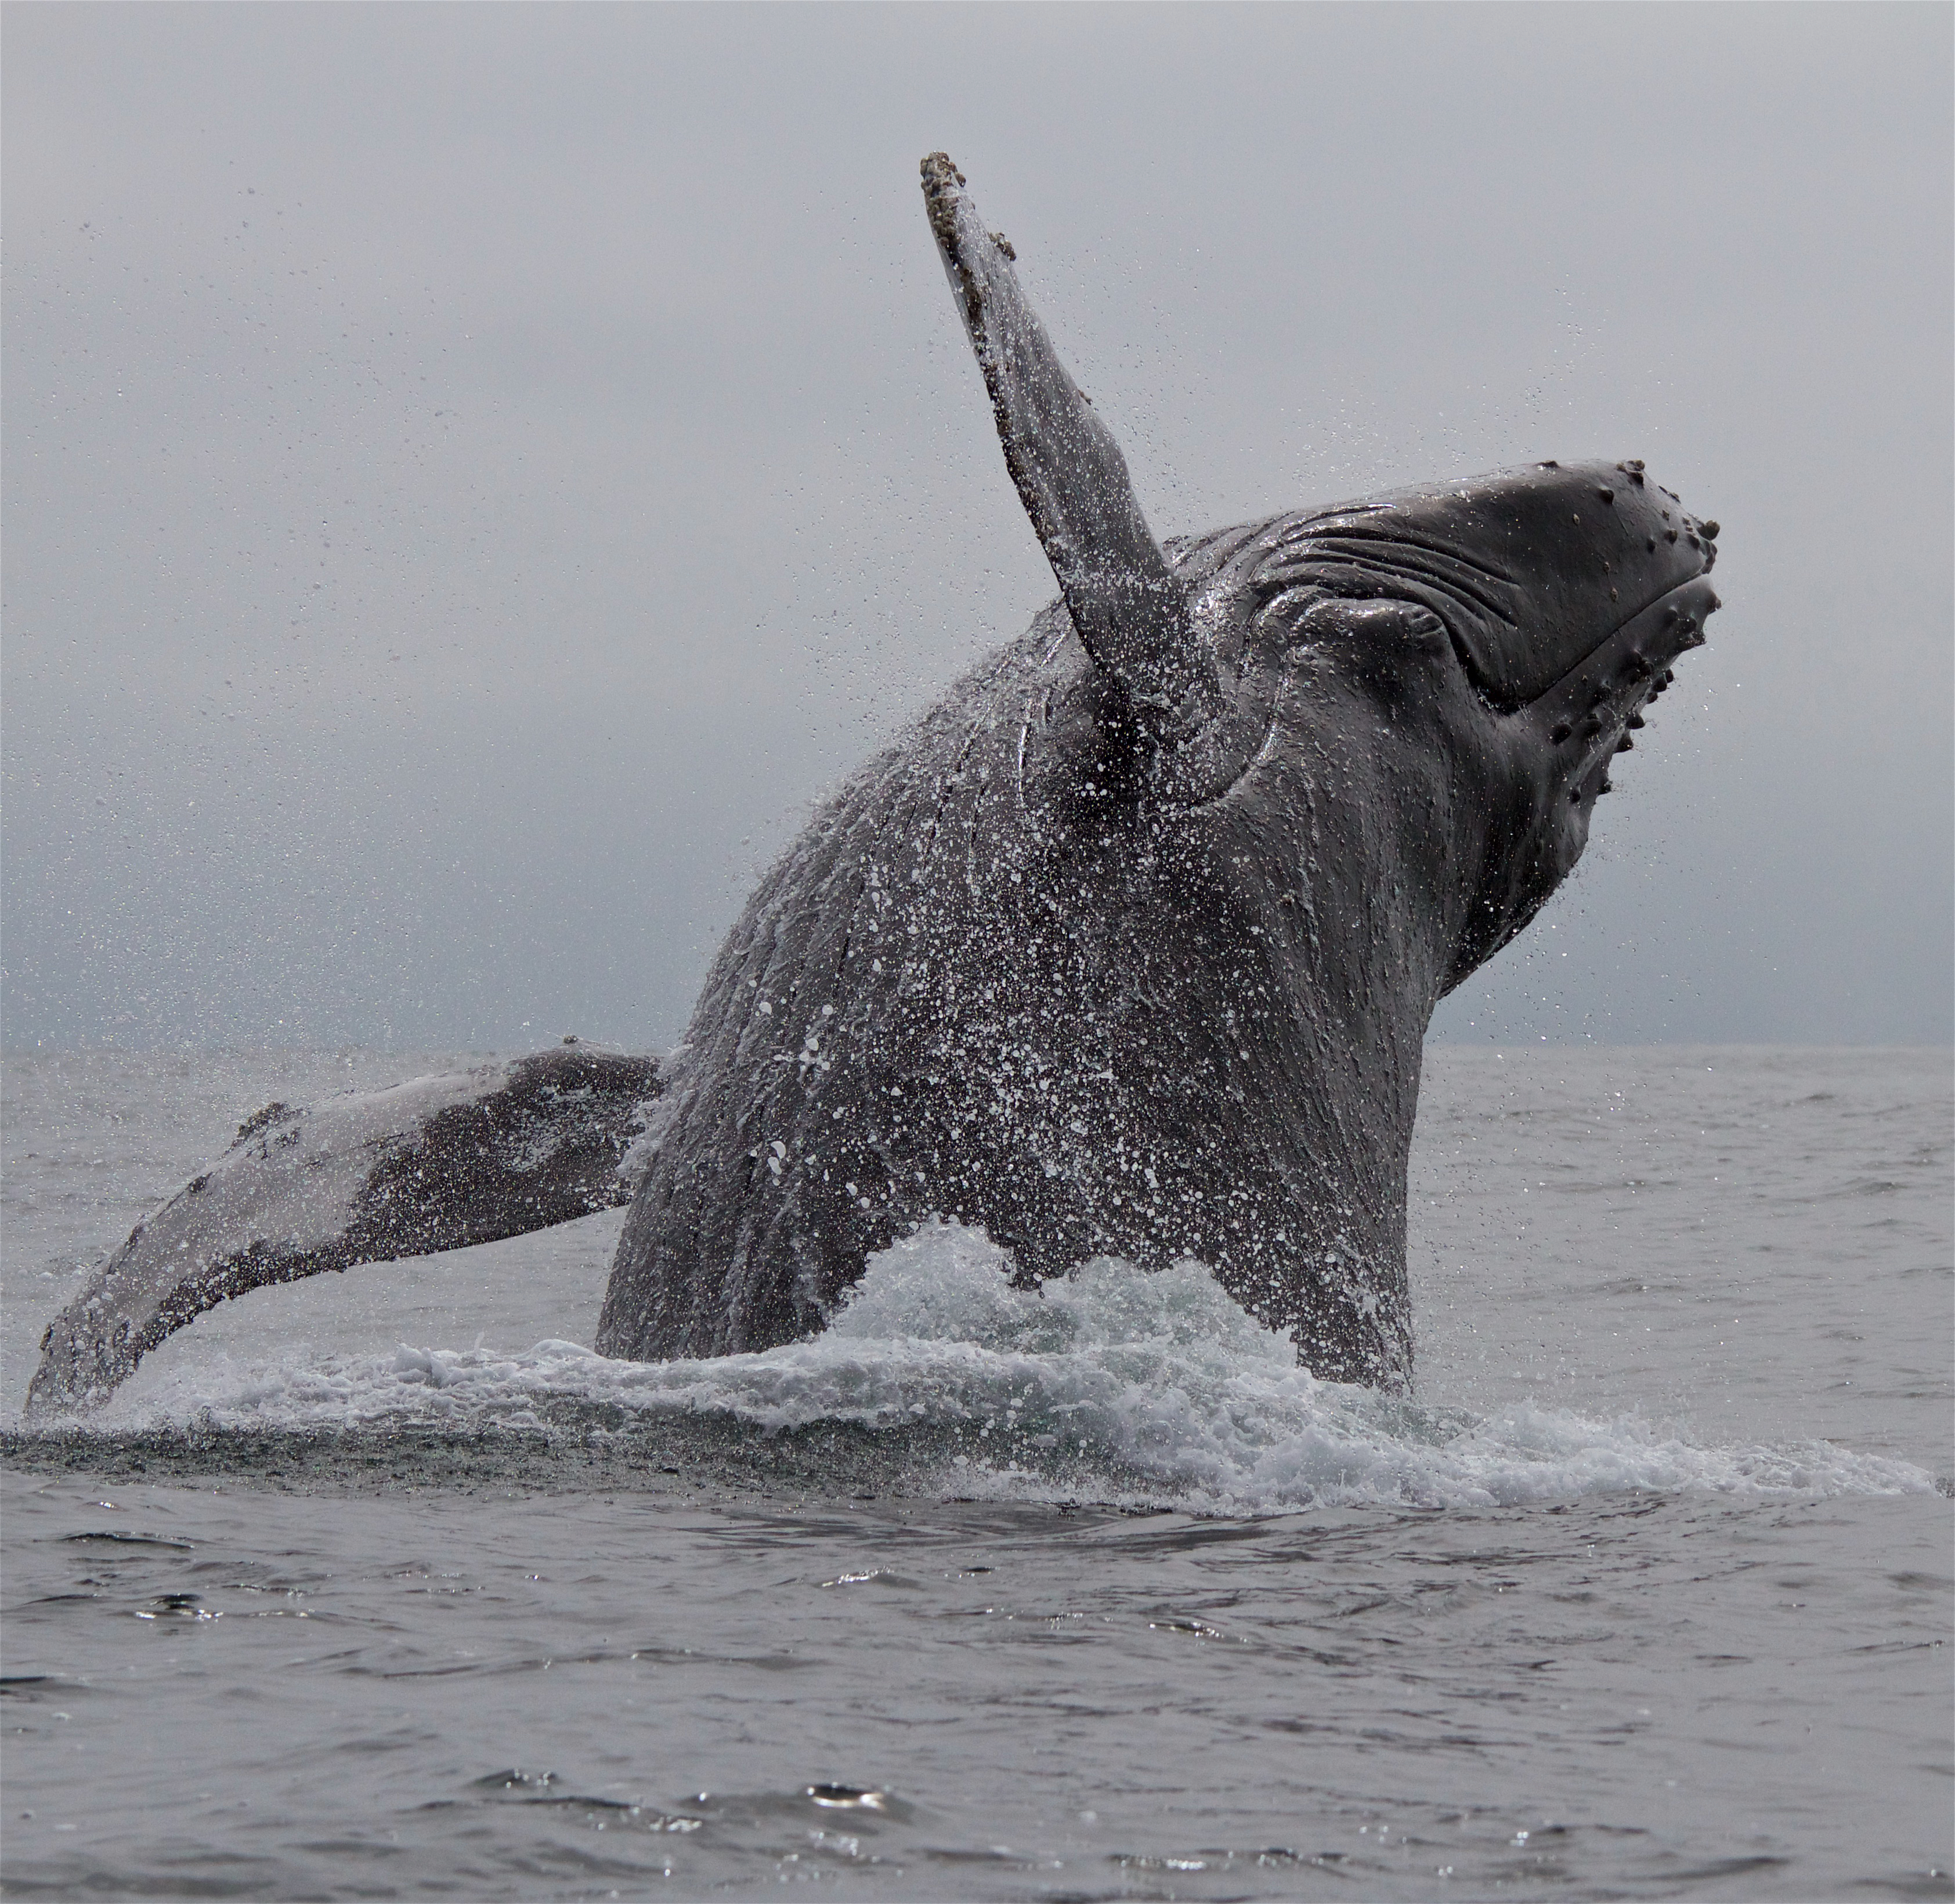 Photograph of humpback whale taken during Oregon State University Marine Mammal Institutes 2017 tagging field season off southern California.